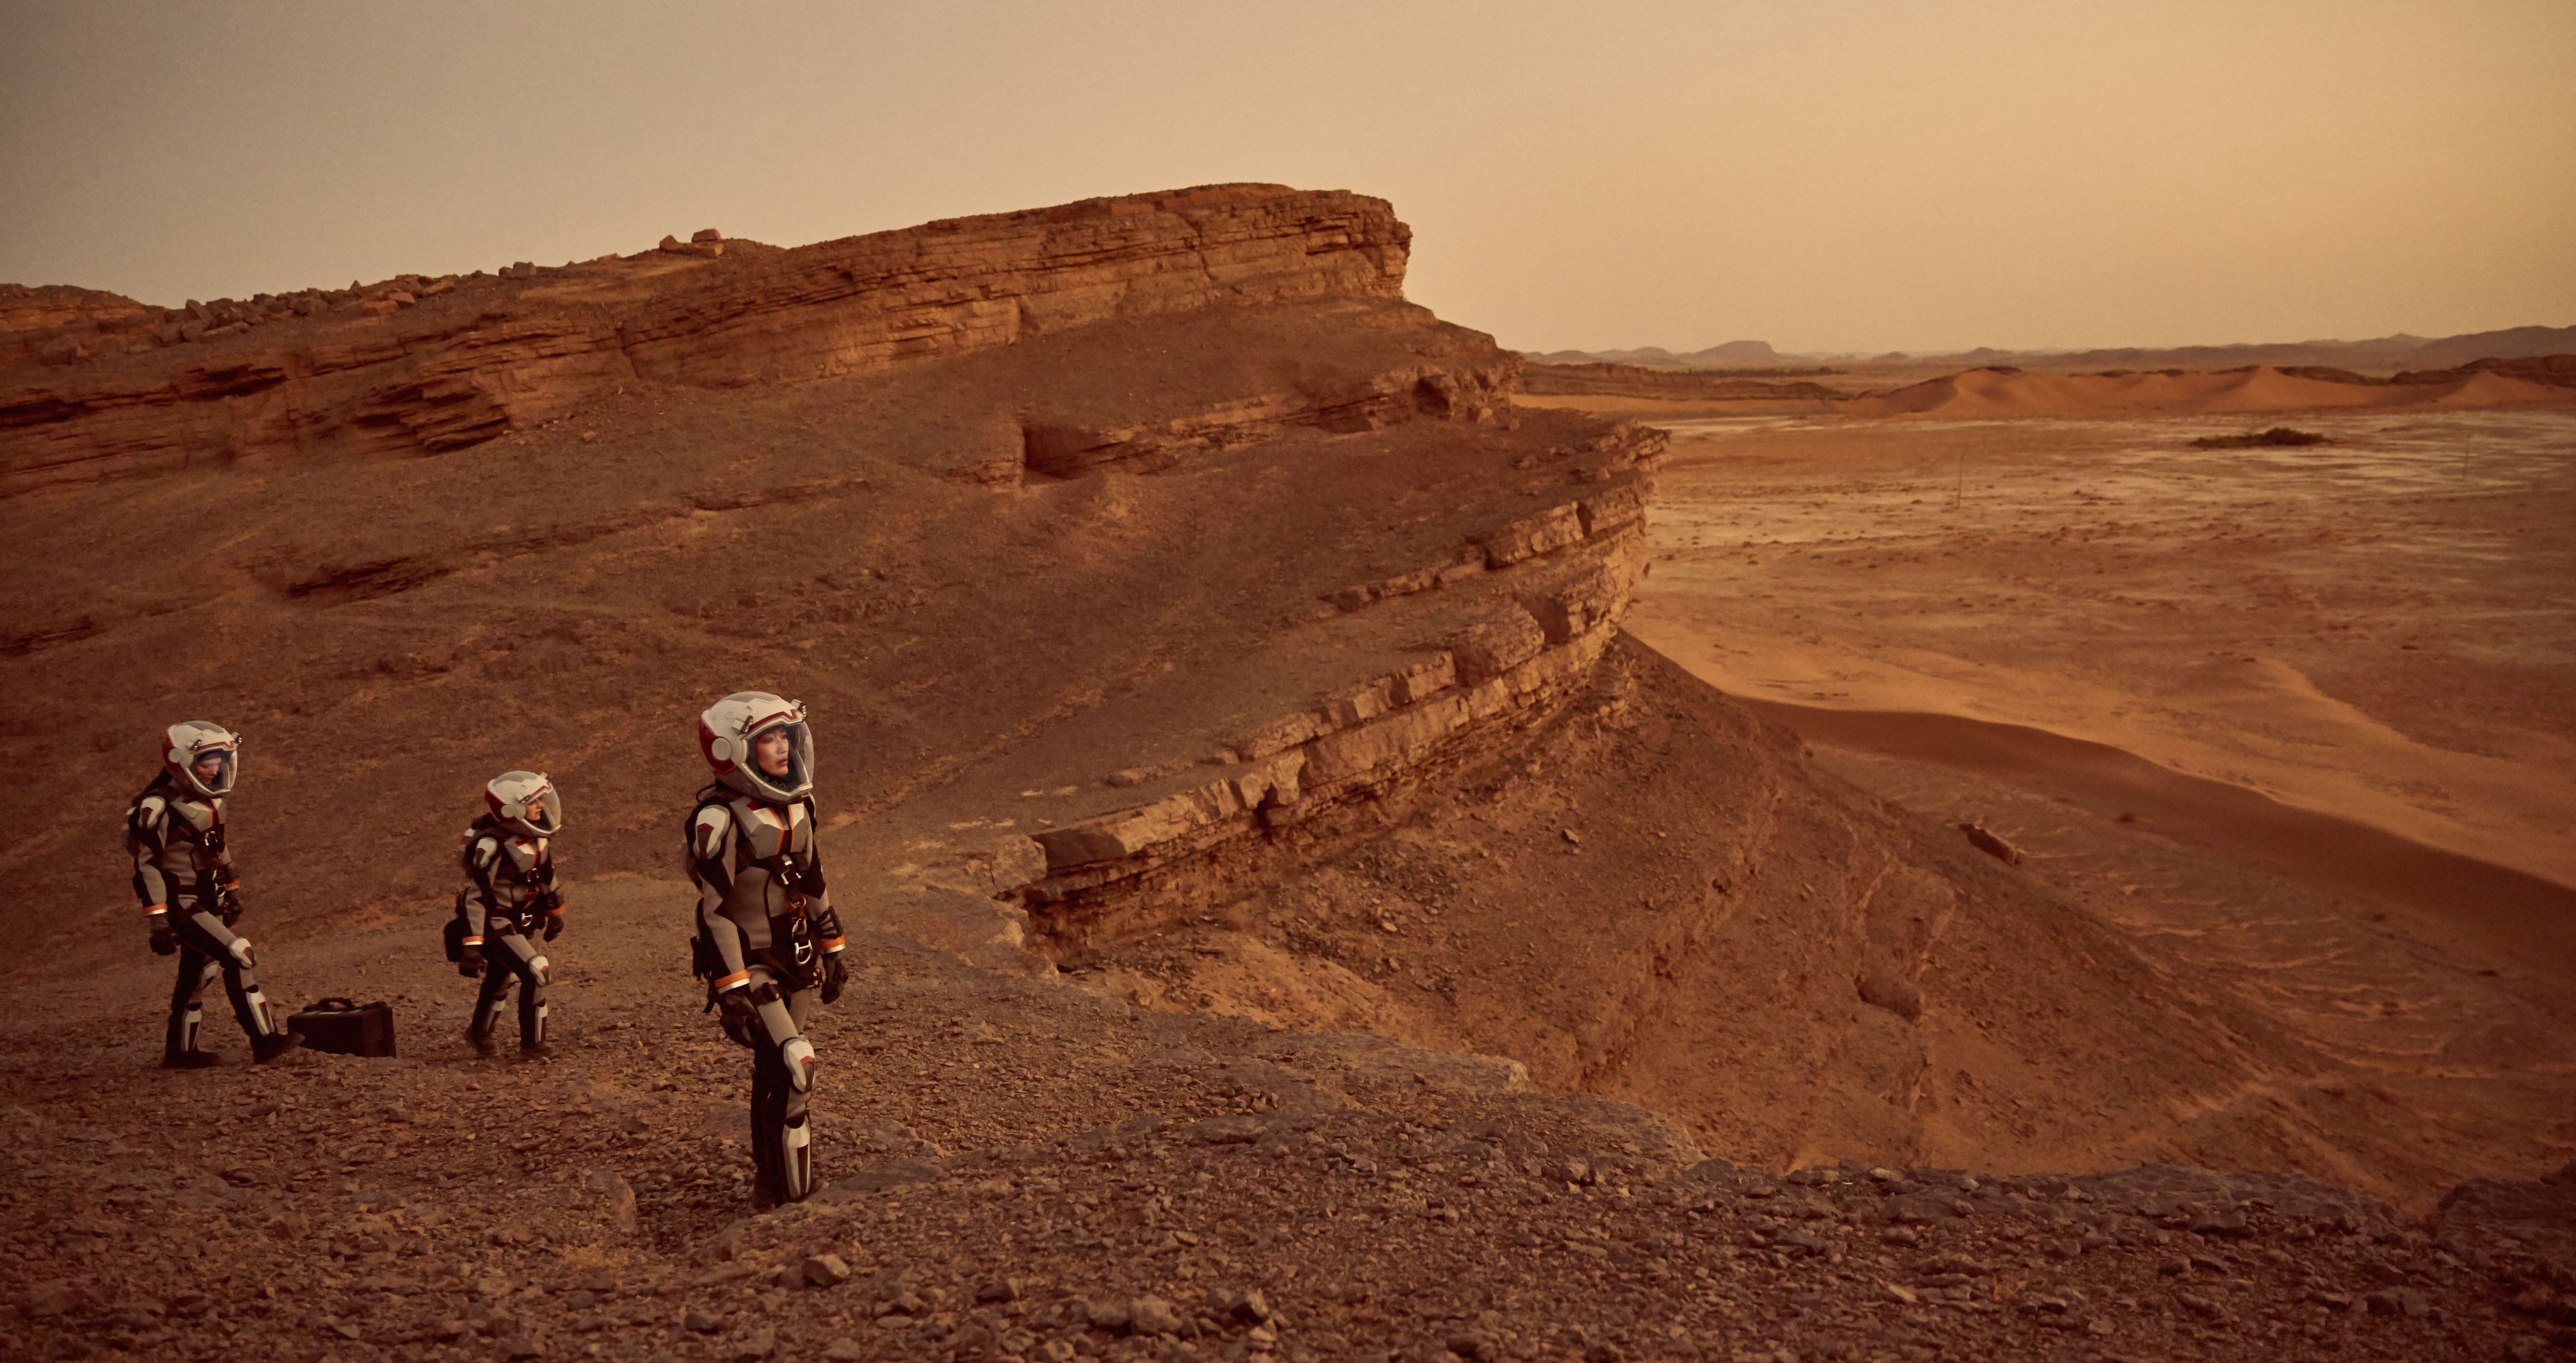 A scene from “Mars”, a six-part mini-series that recently premiered on the National Geographic channel. Photo: National Geographic Channels via AP